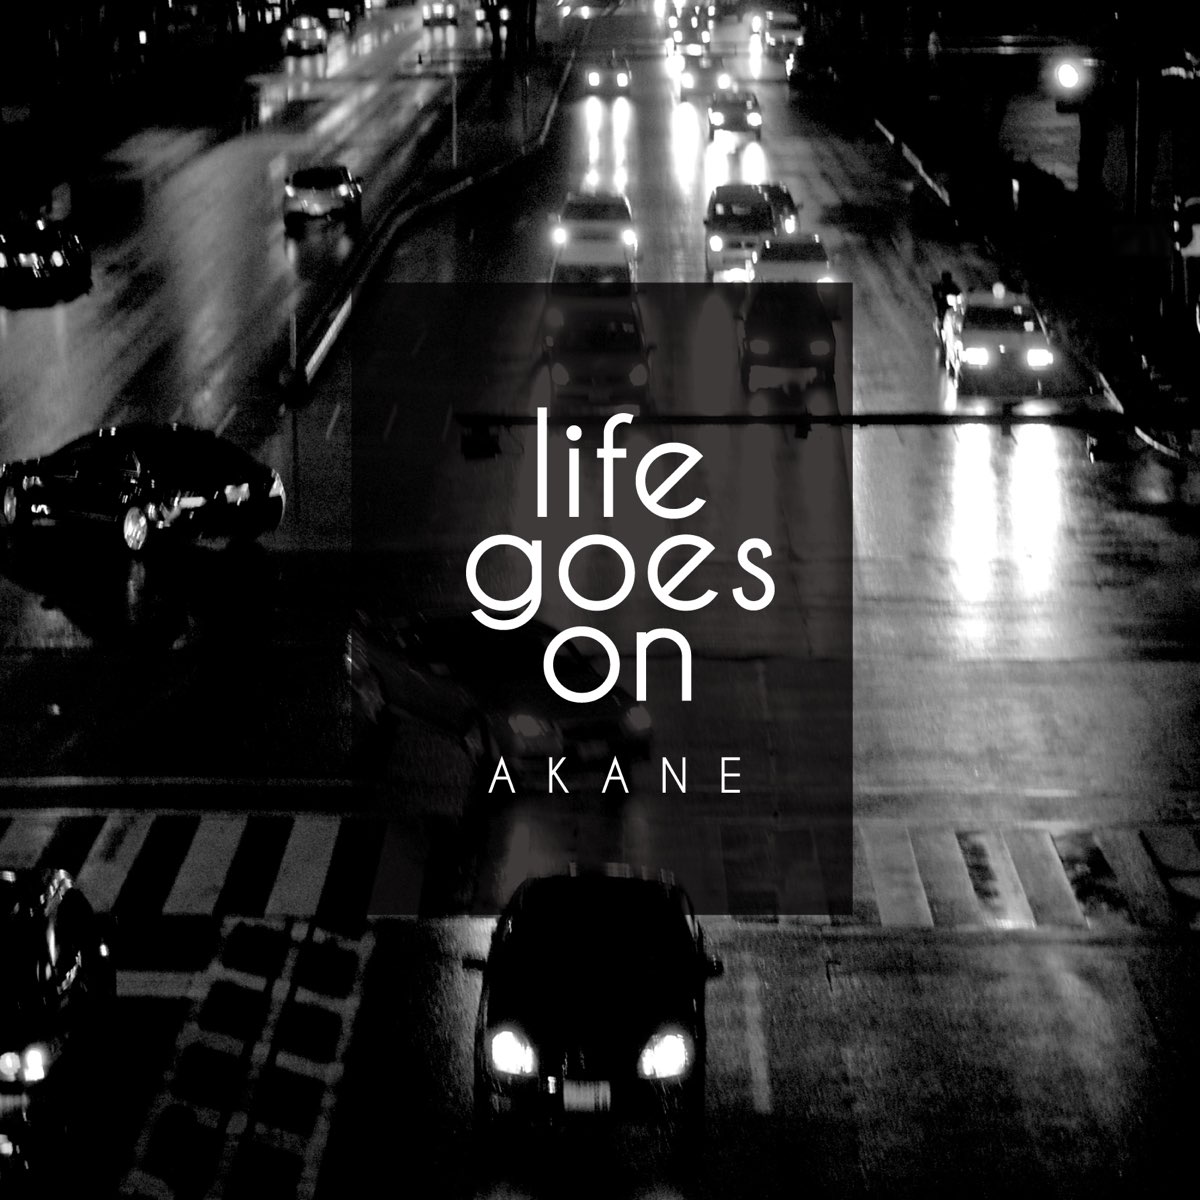 Life goes на русском. Life goes on. Life goes on надпись. Life goes on картинка. Life goes on Life goes on.